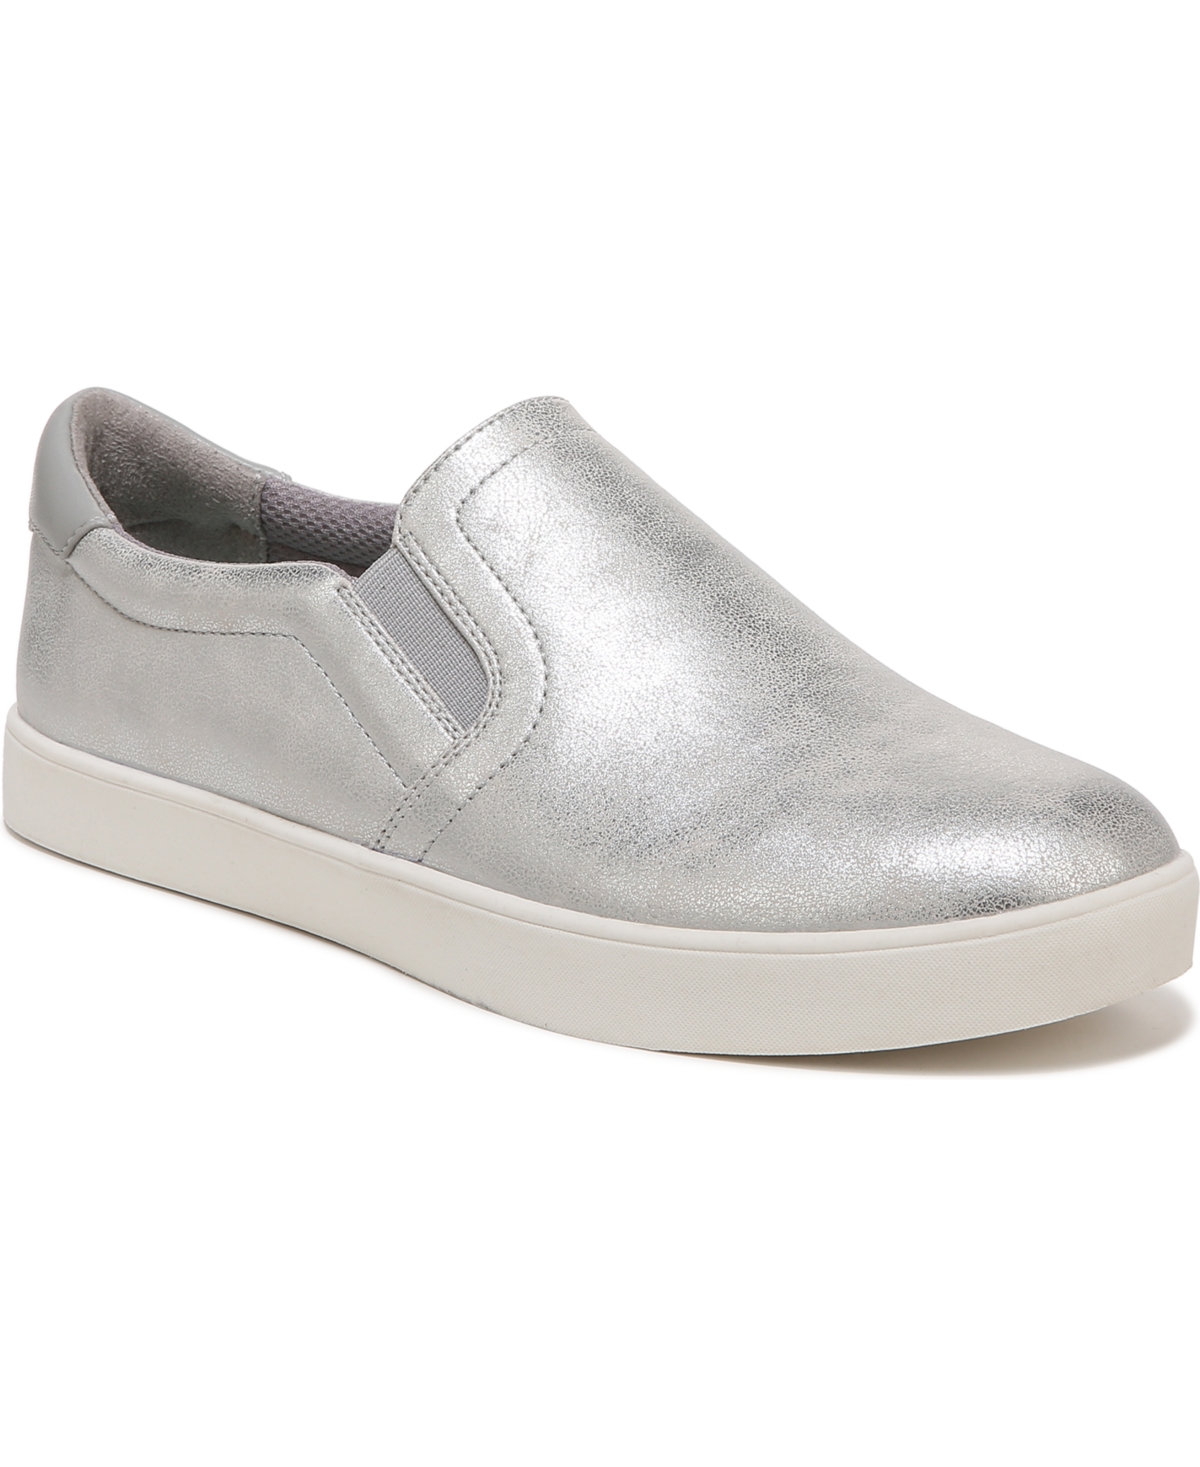 Women's Madison-Party Slip-On Sneakers - Silver Faux Leather